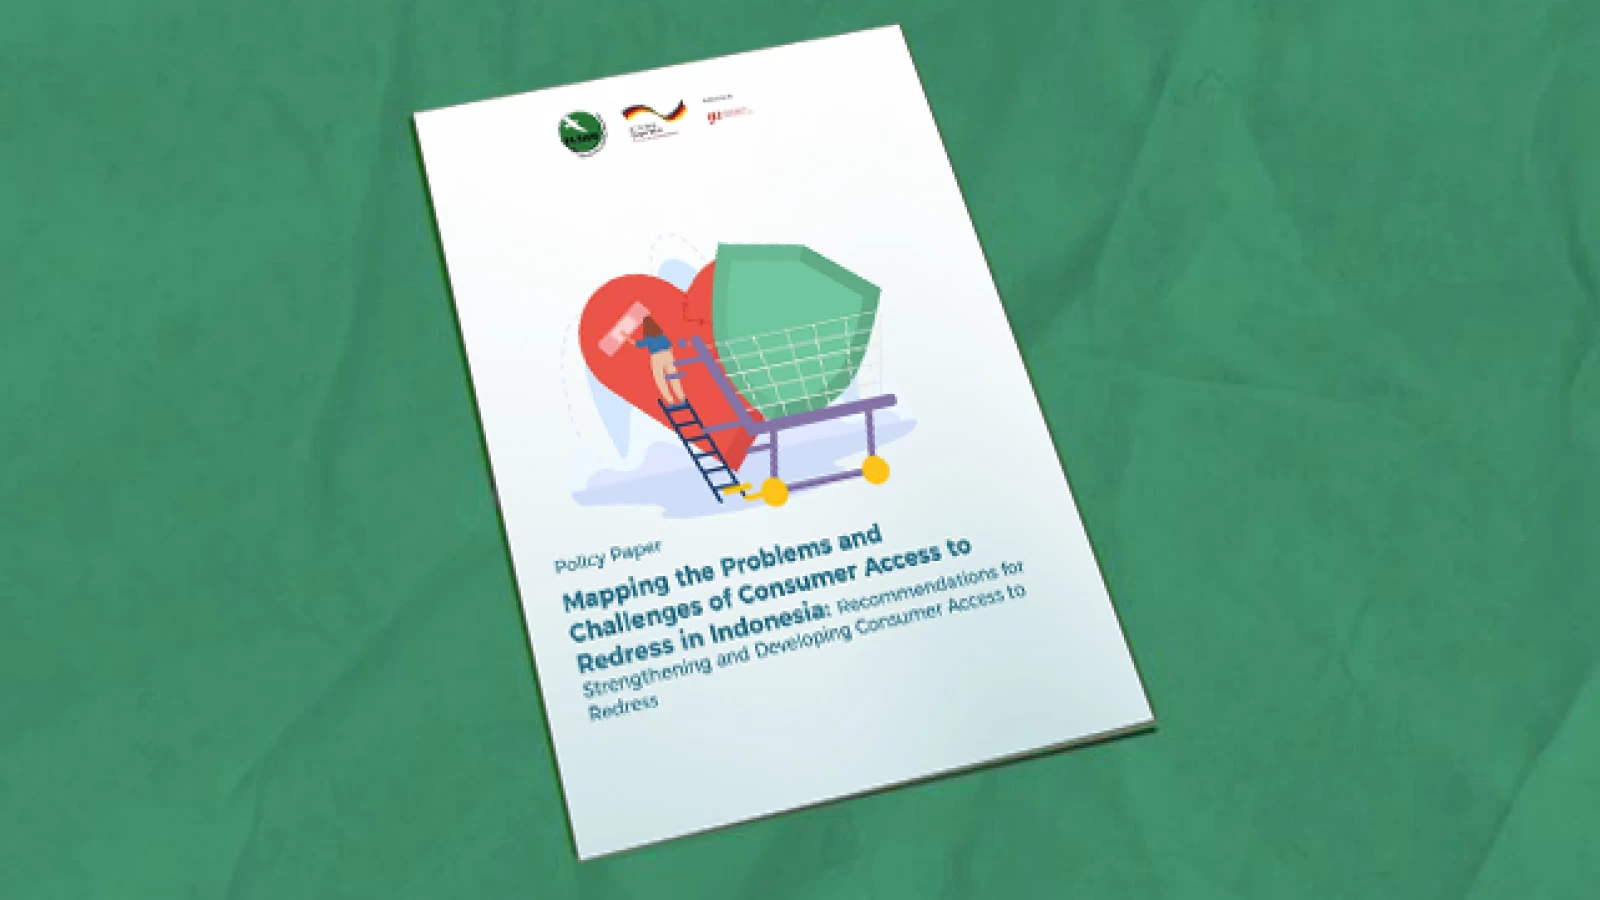 Mapping the Problems and Challenges of Consumer Access to Redress in Indonesia